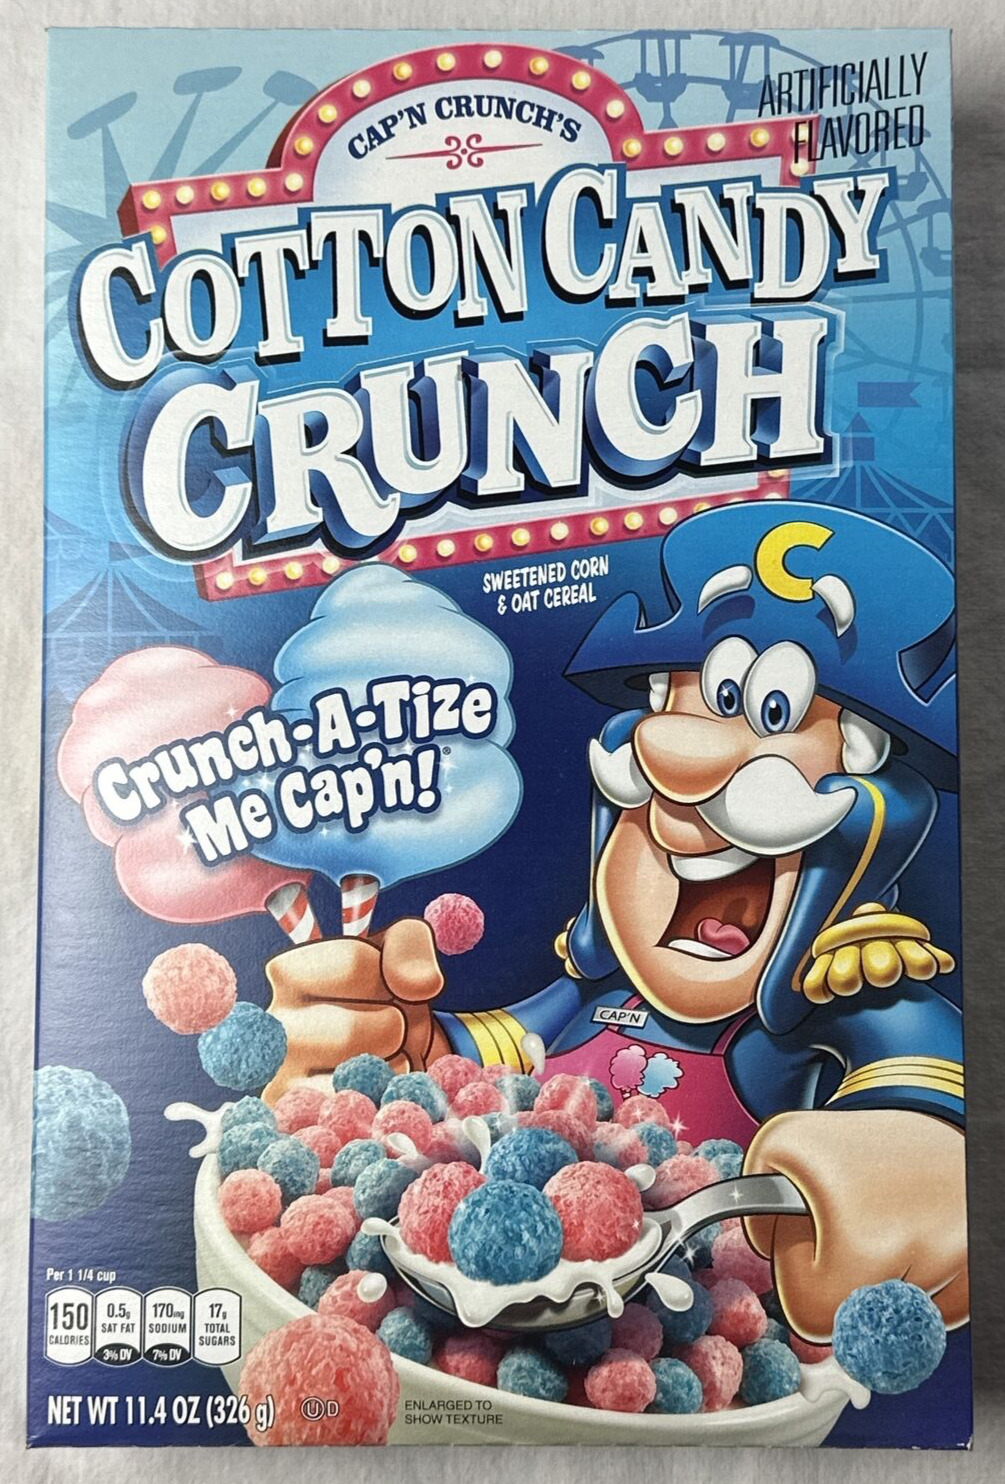 NEW Unopened Cap\'n Crunch\'s Cotton Candy Crunch Cereal Collectable Limited Ed 